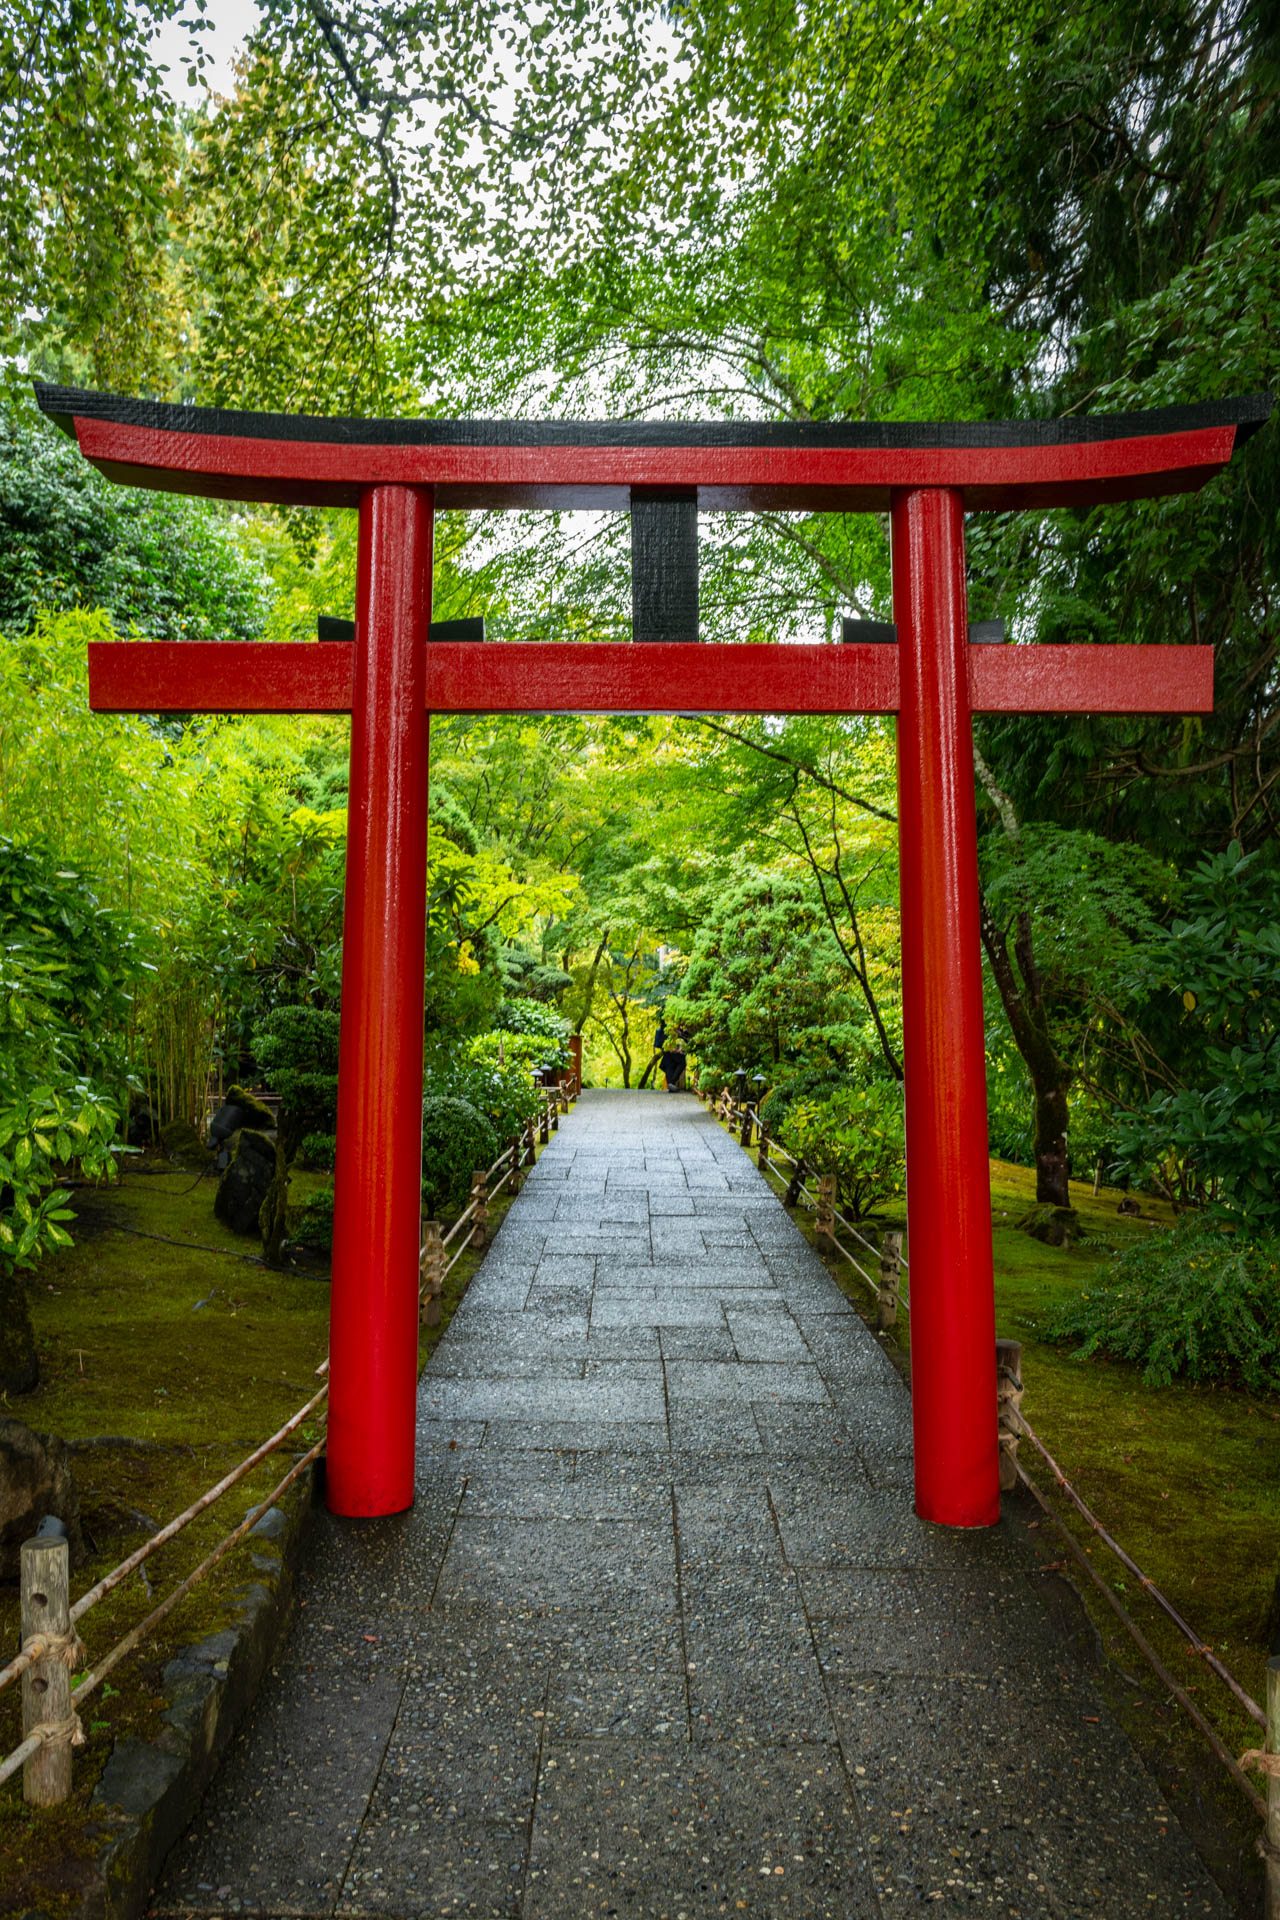 Entrance to the Japanese Garden at Butchart Gardens